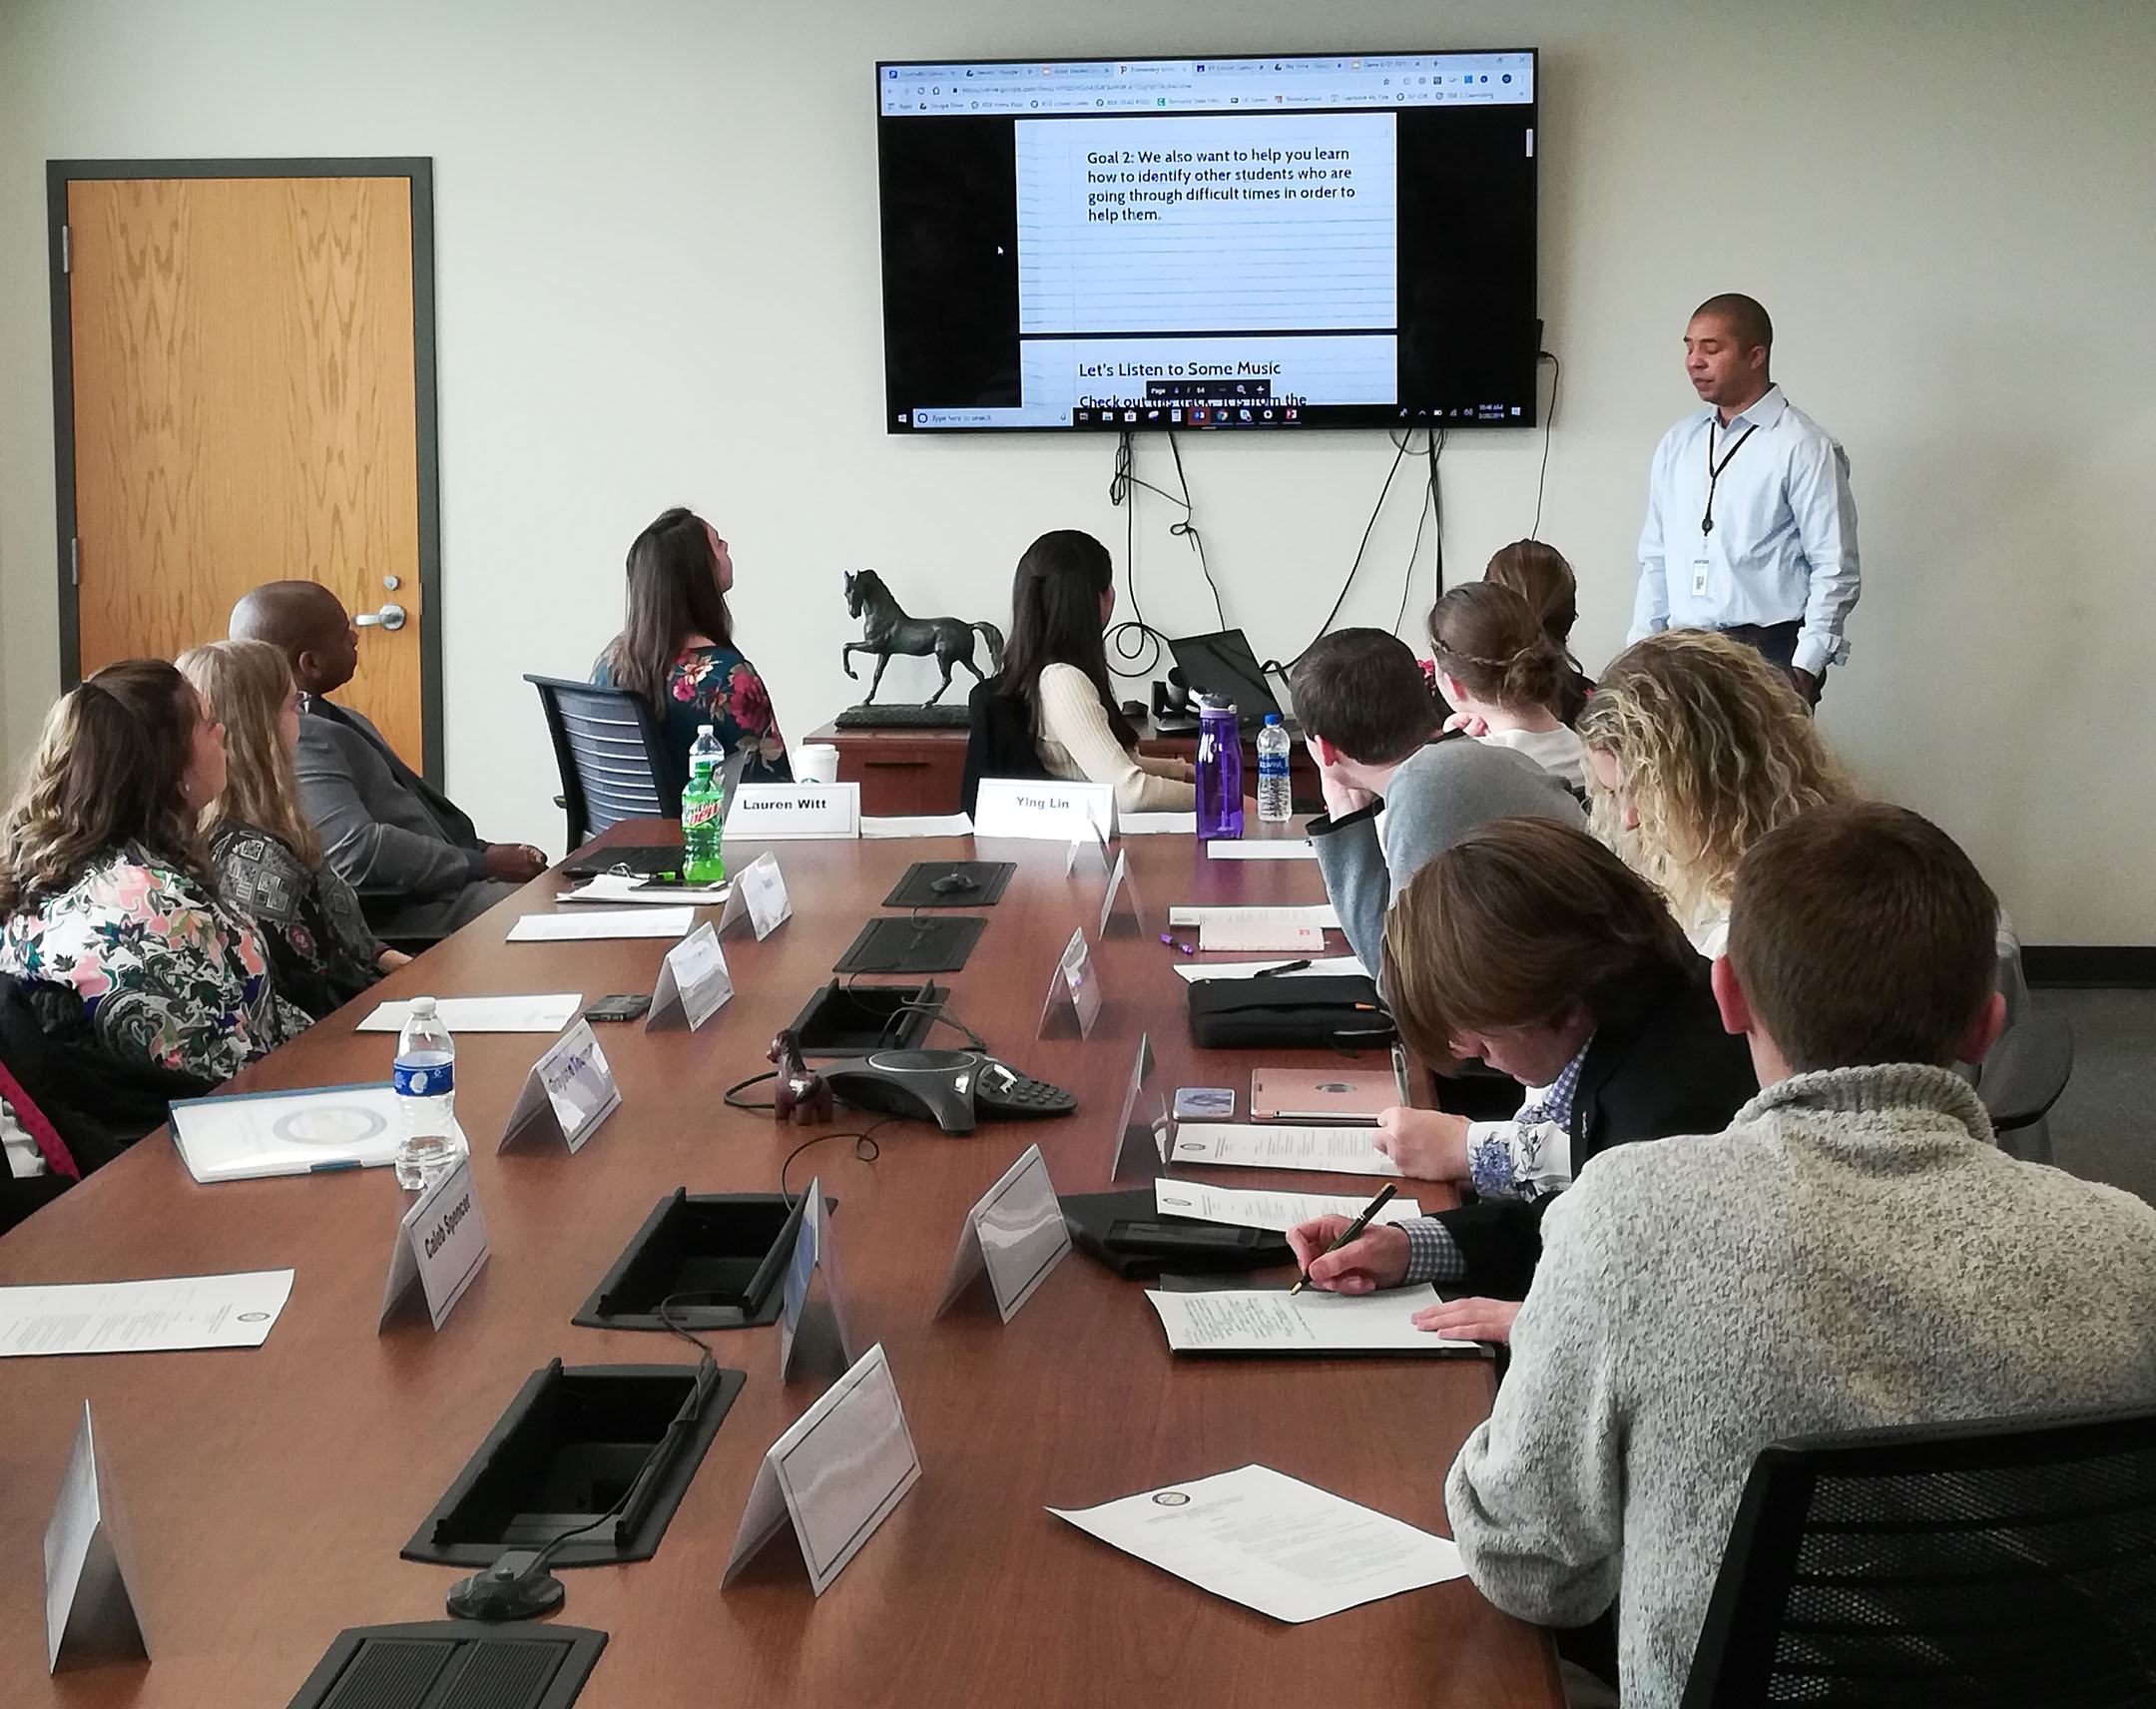 Damien Sweeney, KDE’s program coordinator for Comprehensive School Counseling, addresses mental health concerns from the Student Advisory Council. Photo by Jacob Perkins, March 20, 2019